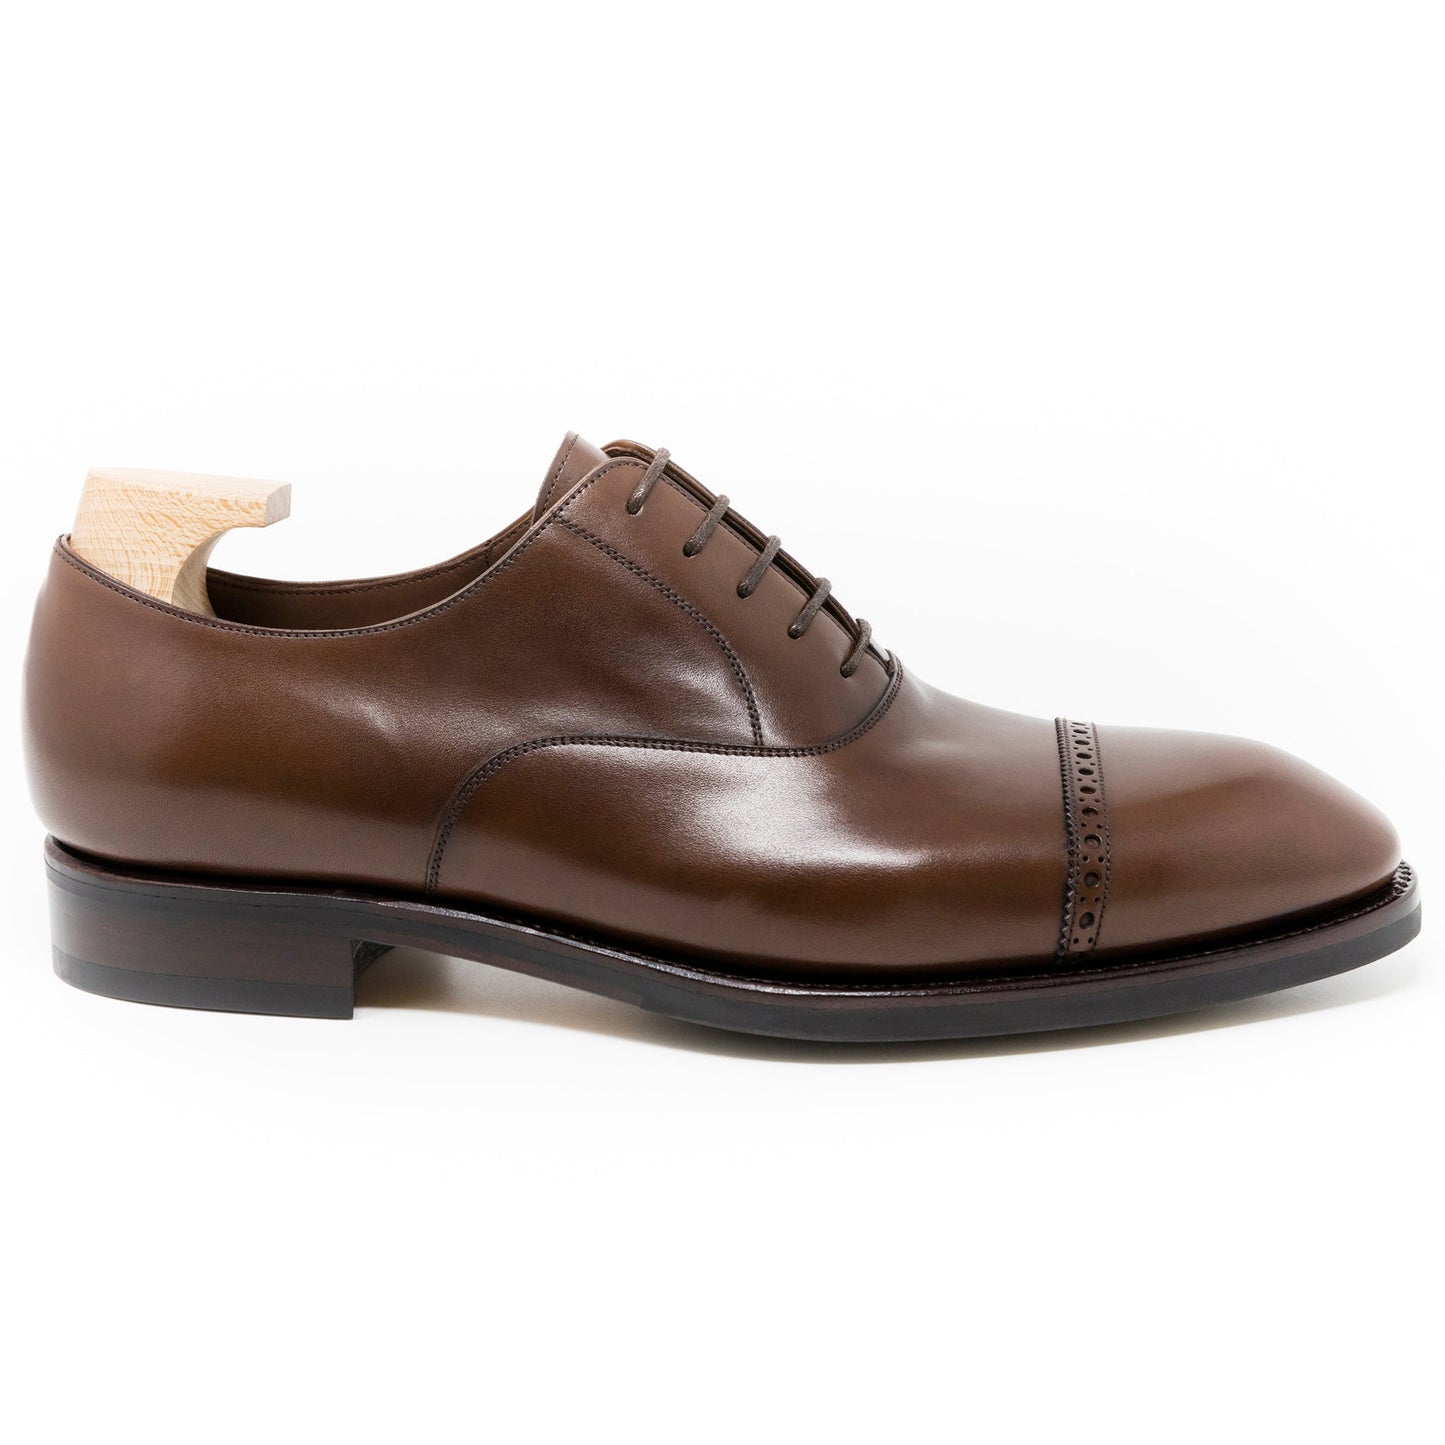 TLB Mallorca leather shoes MURPHY